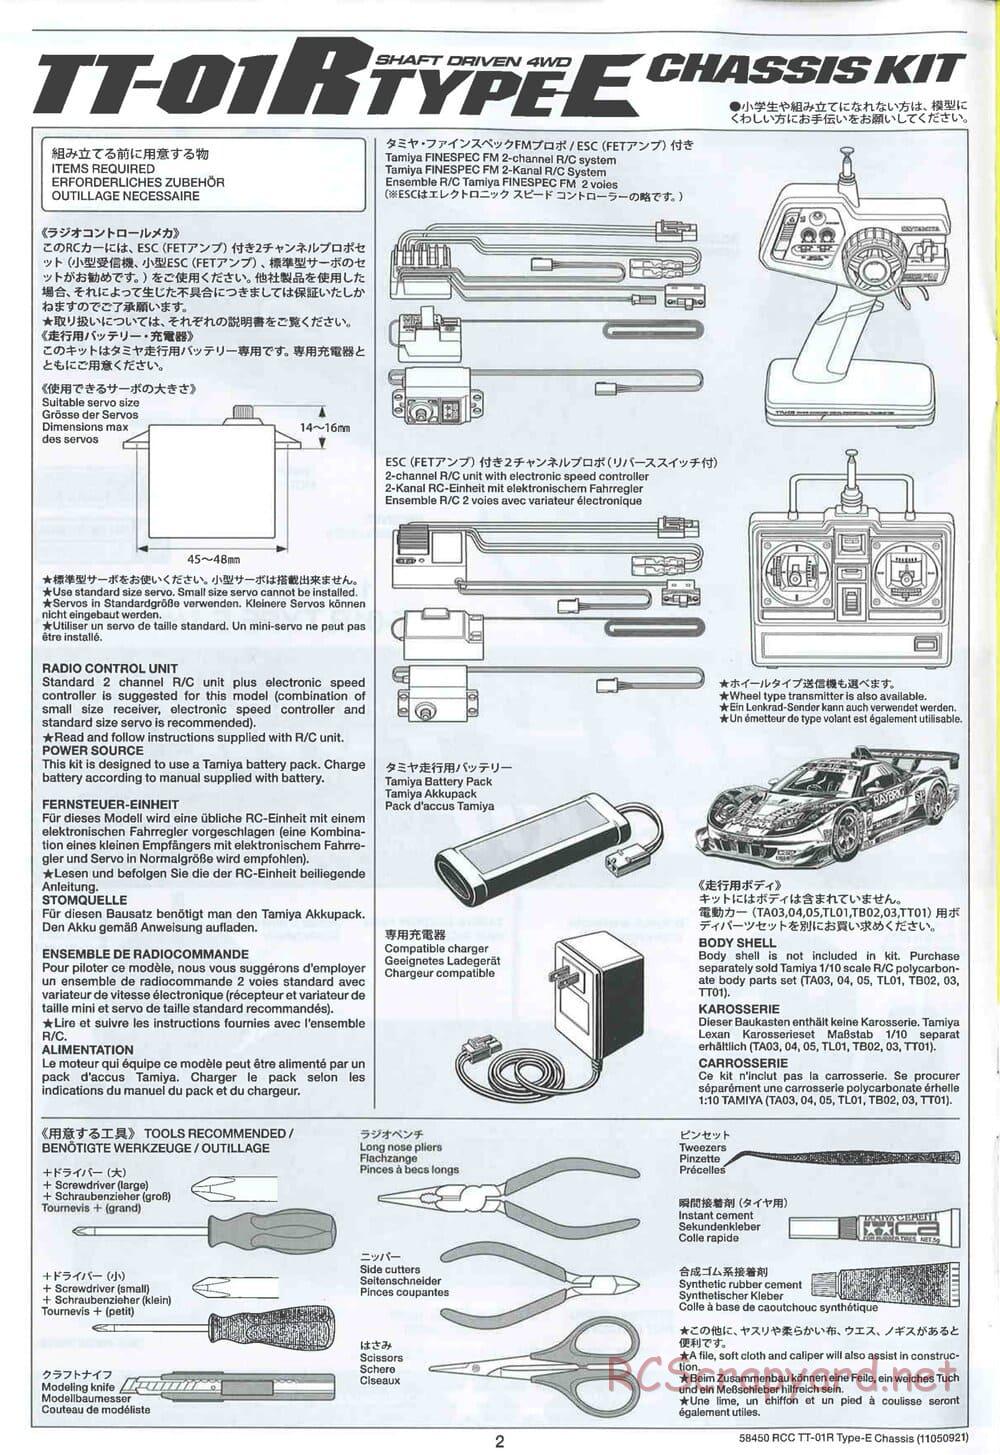 Tamiya - TT-01R Type-E Chassis - Manual - Page 2